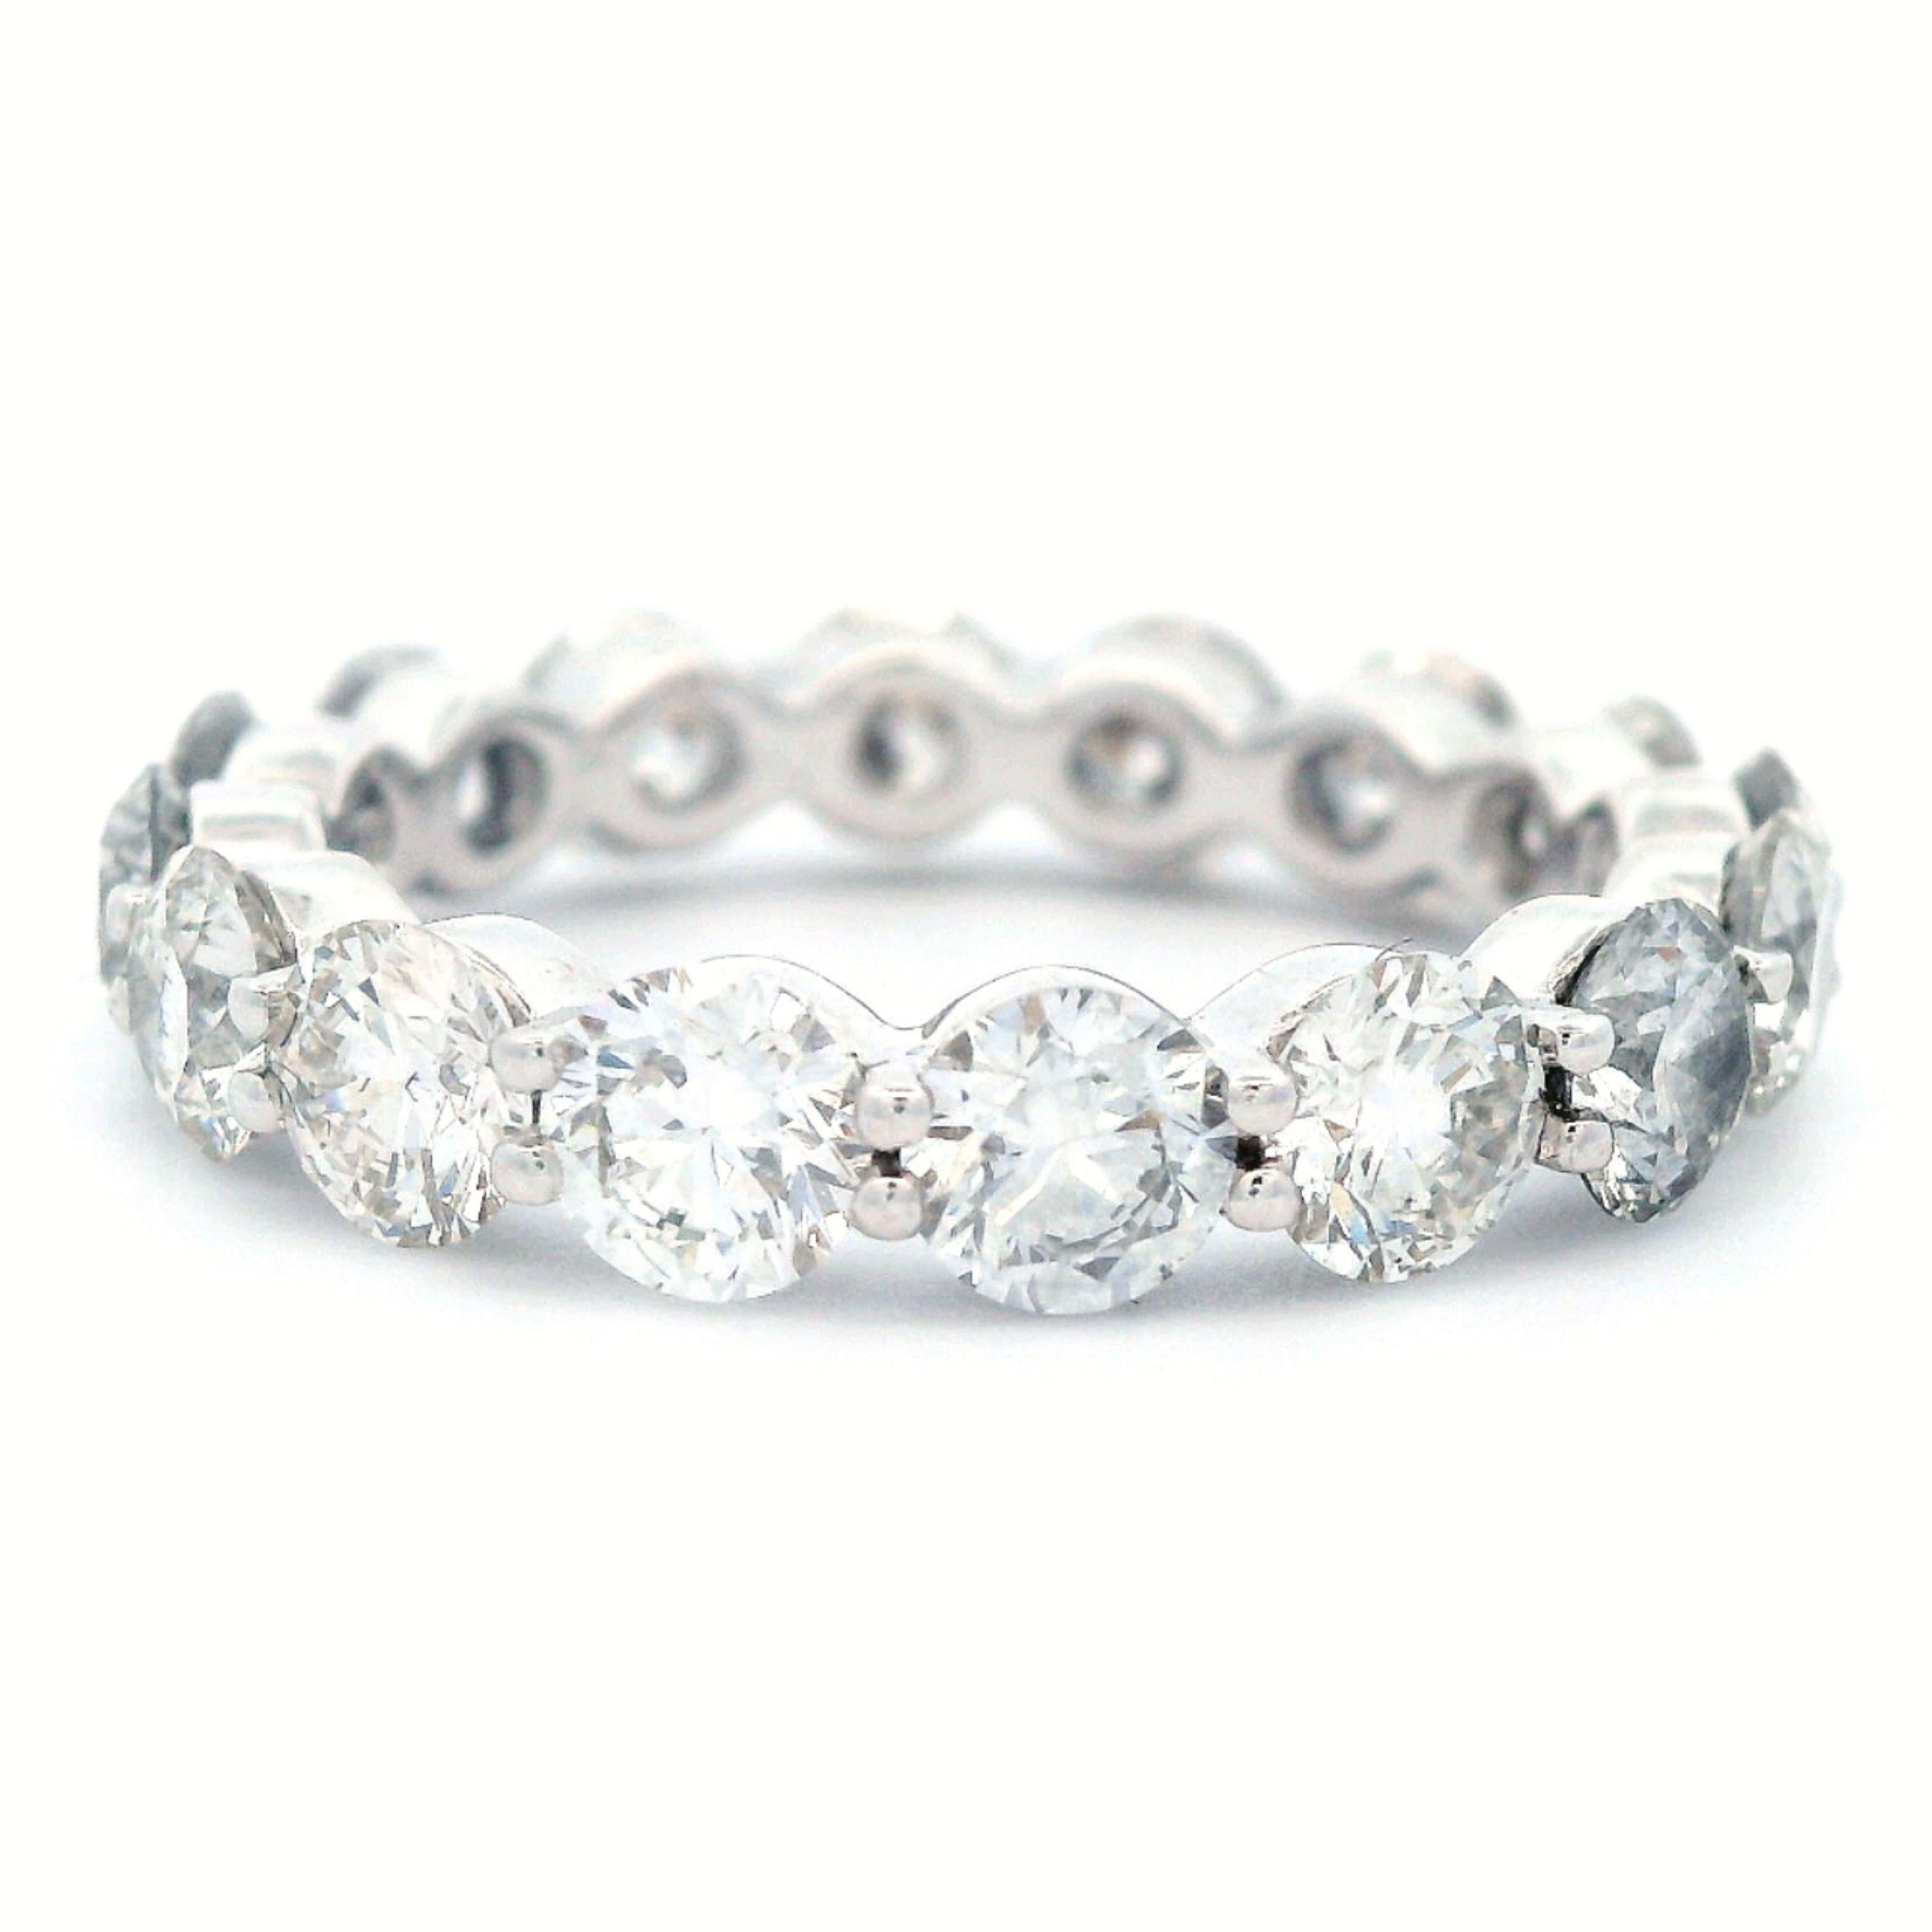 Stunning round diamond eternity band, by Alexander Beverly Hills.
16 round brilliant diamonds, 3.88 carats total. G color and VS clarity. Set in 18k white gold, 2.99 grams, size 6.25, double shared prong setting. 
Accommodated with an up-to-date